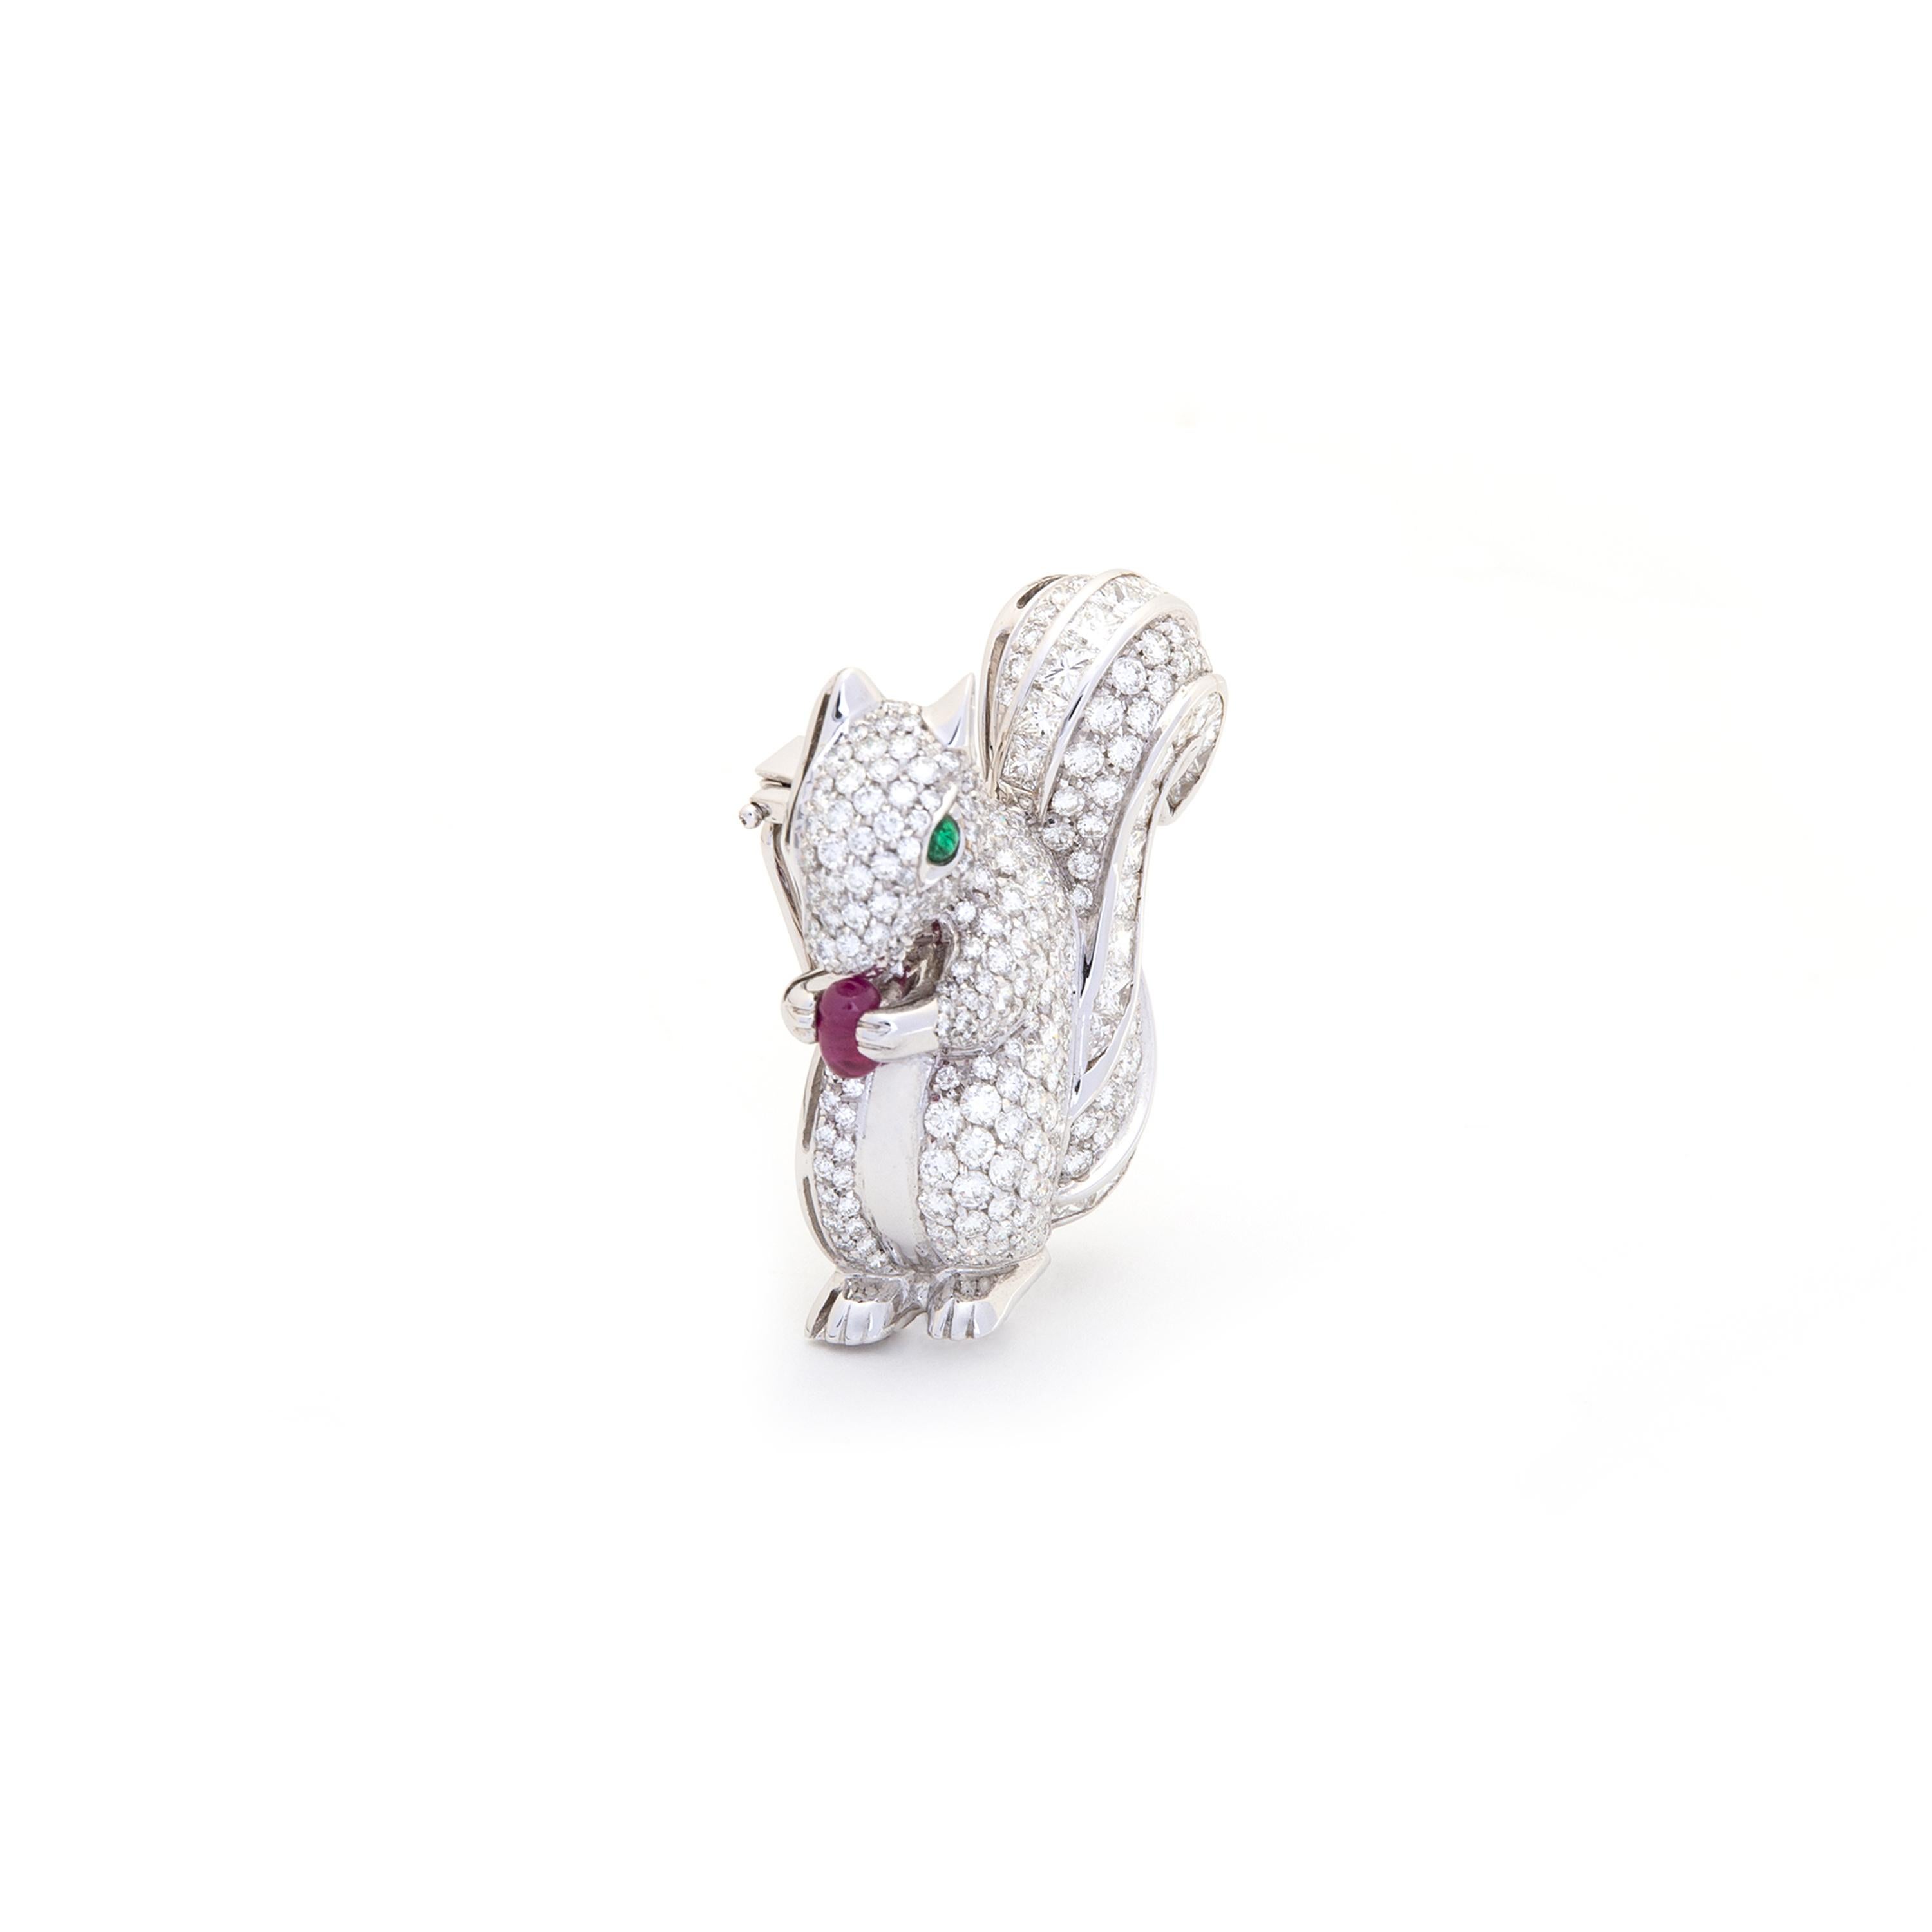 Lovely Squirrel Brooch set by 30 Diamonds 3.41 carats, 261 Diamonds 3.90 carats, one Emeraude 0.12 carat and one Ruby 2.02 carats on white gold 18k.